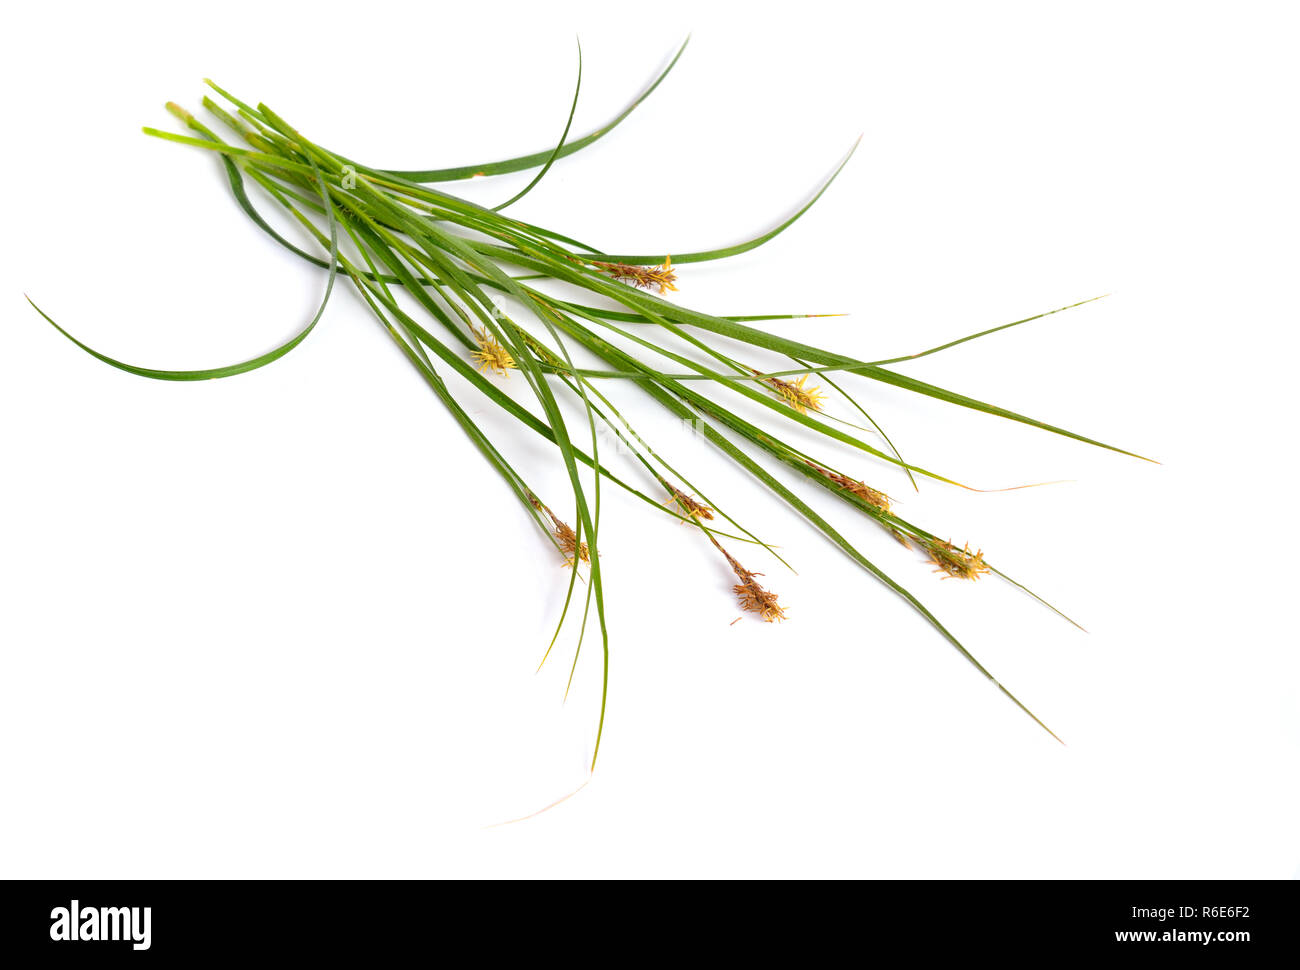 Carex humilis, also known as dwarf sedge. Isolated on white background. Stock Photo